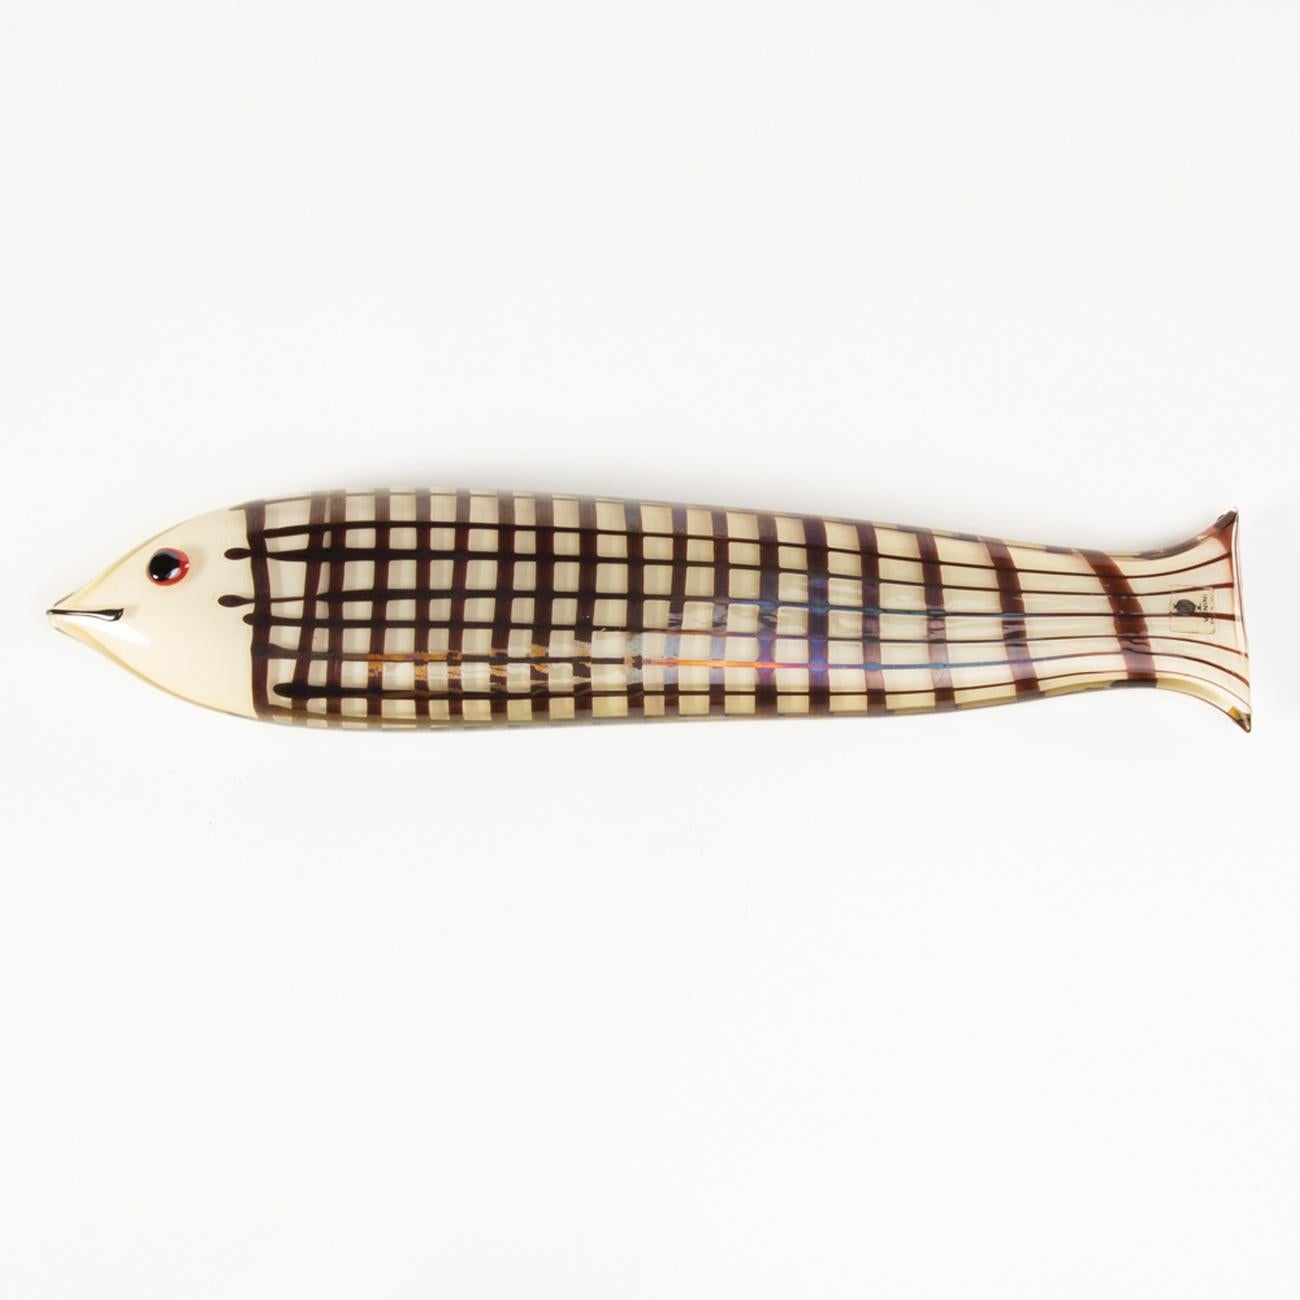 This large fish measures 36 centimeters long in opaque clear amber glass and decorated with a grid of dark amethyst glass. The detail of the black eye on a red background. Ken Scott wanted a slightly iridescent surface for this model.

This